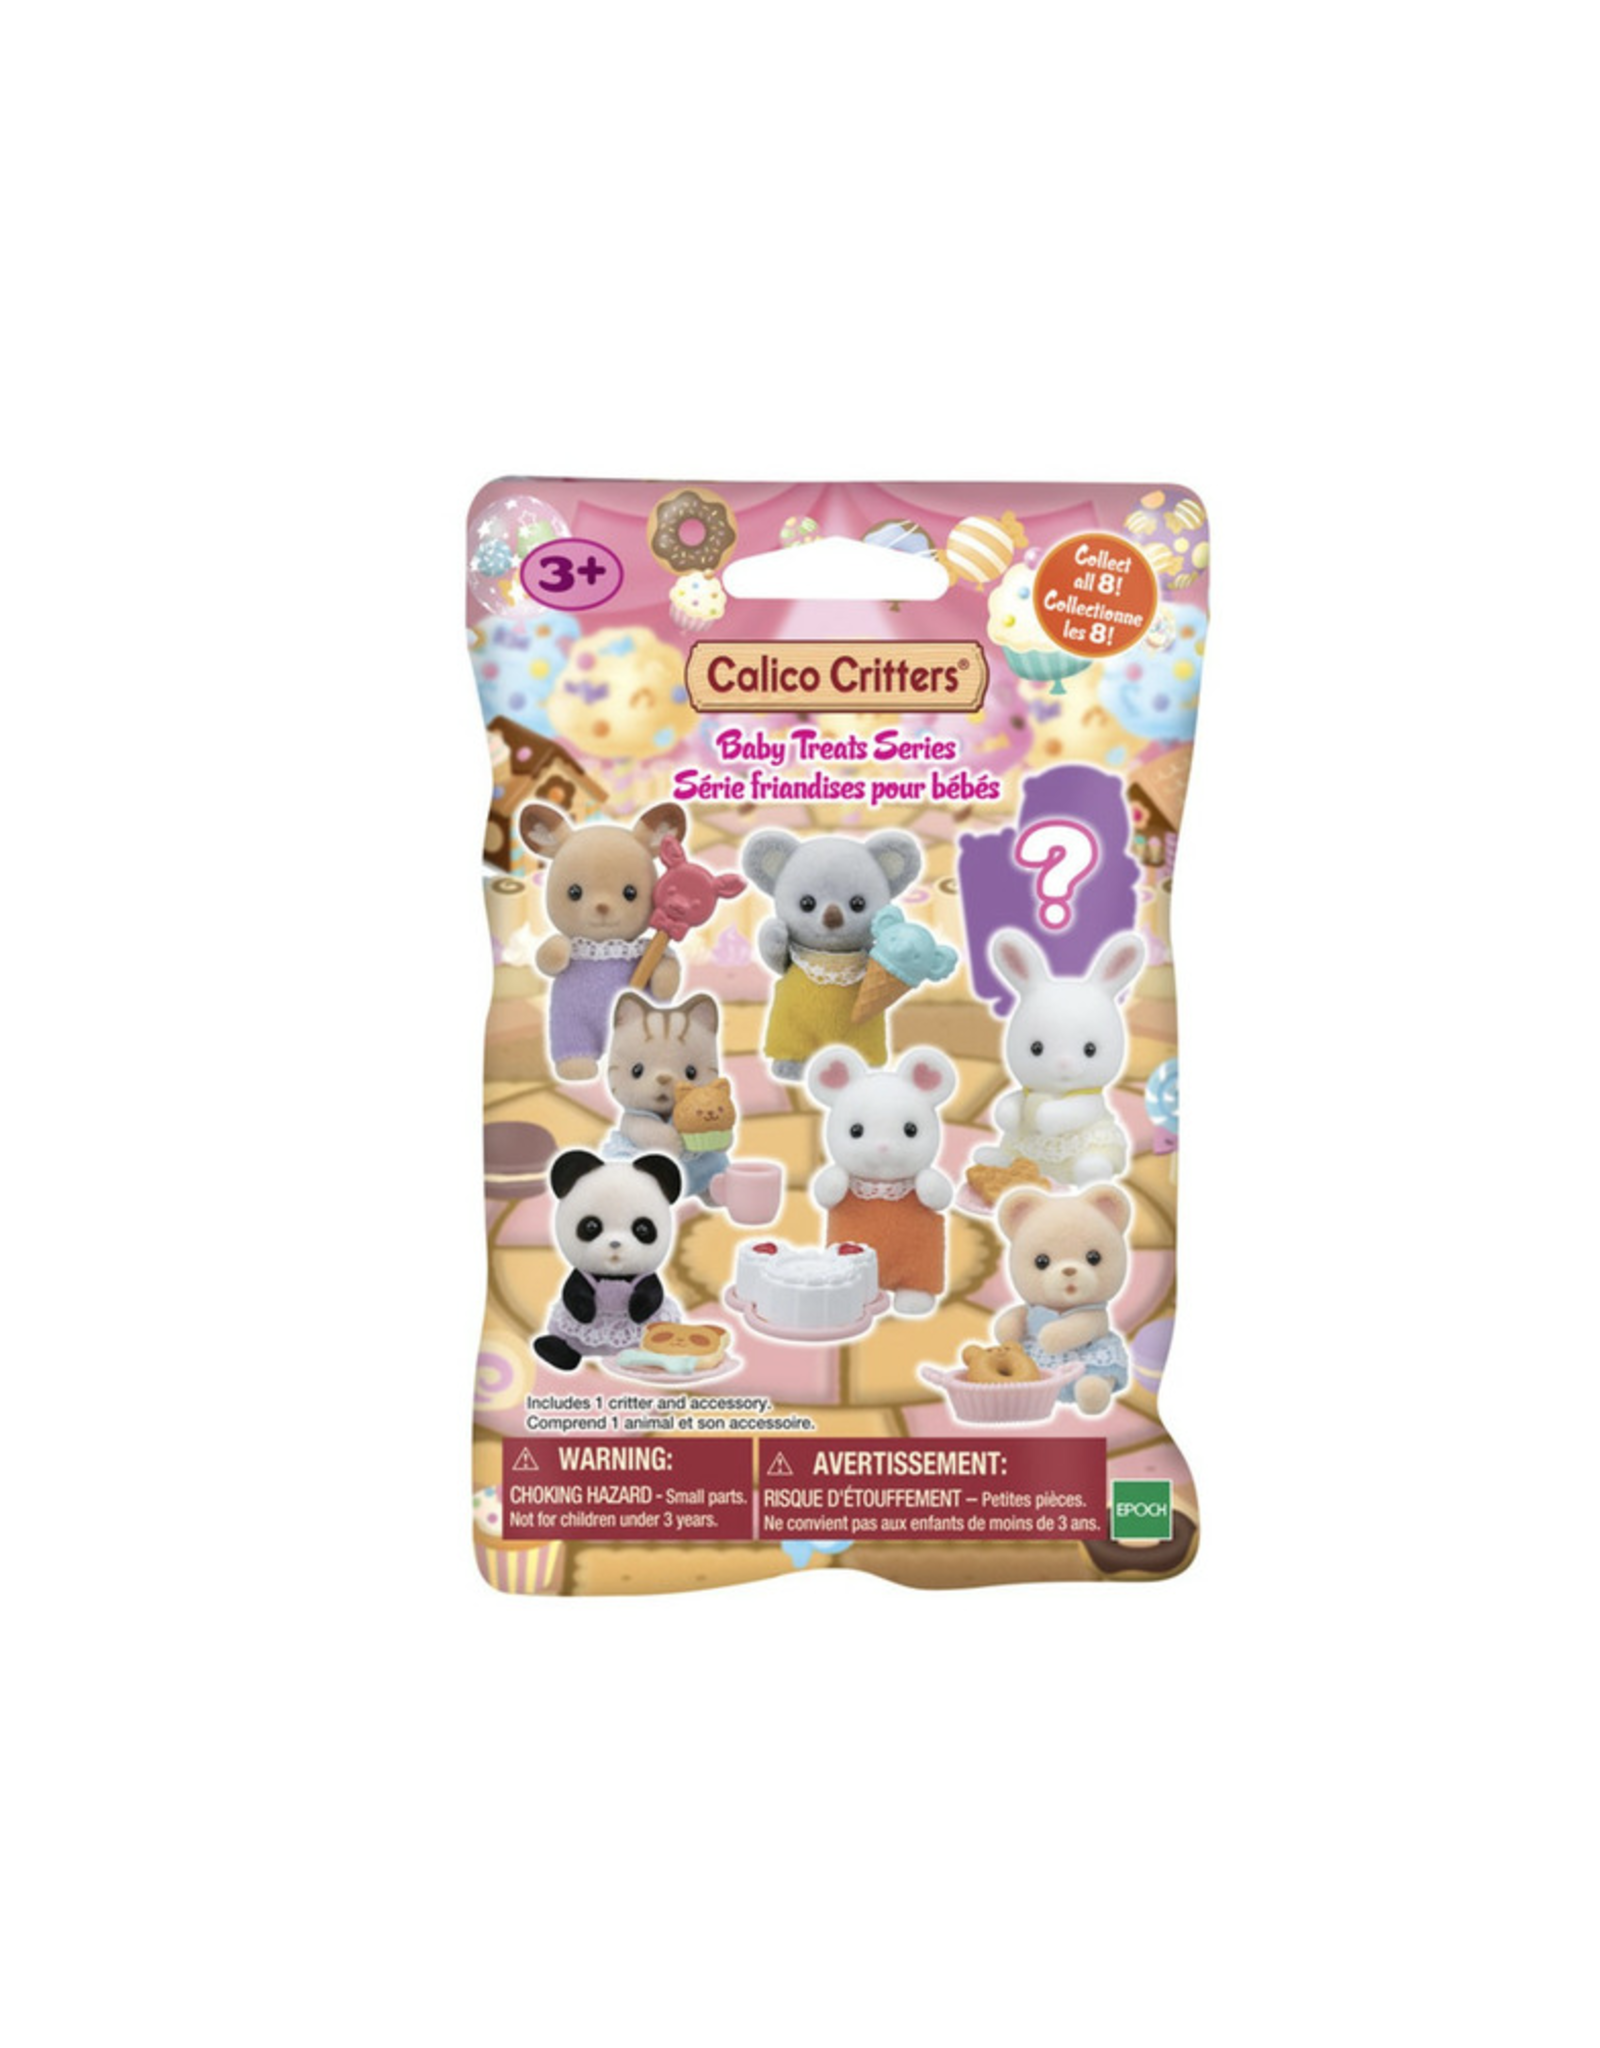 Calico Critters Calico Critters Baby Collectibles, Baby Treats Series